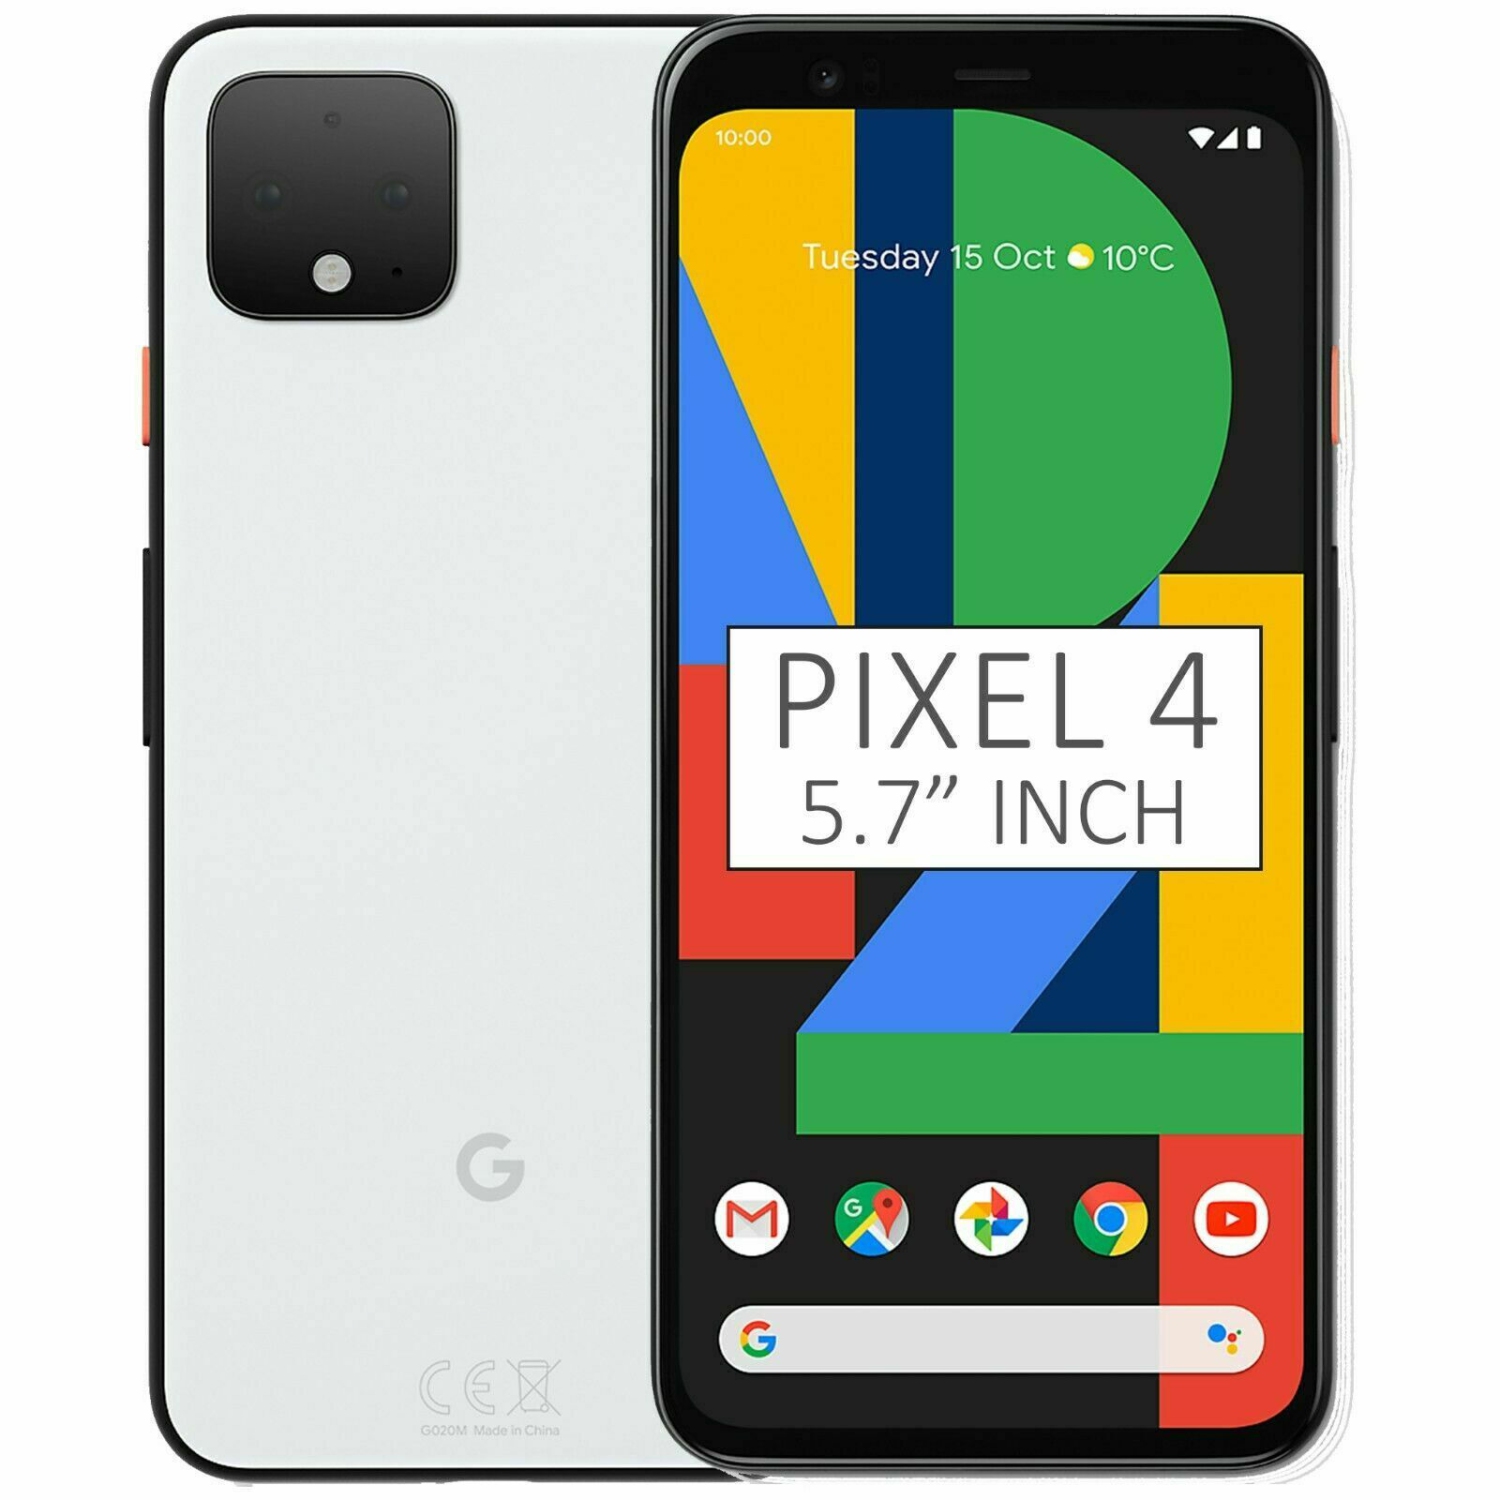 Google Pixel 4 64GB Smartphone - Clearly White - Unlocked - New